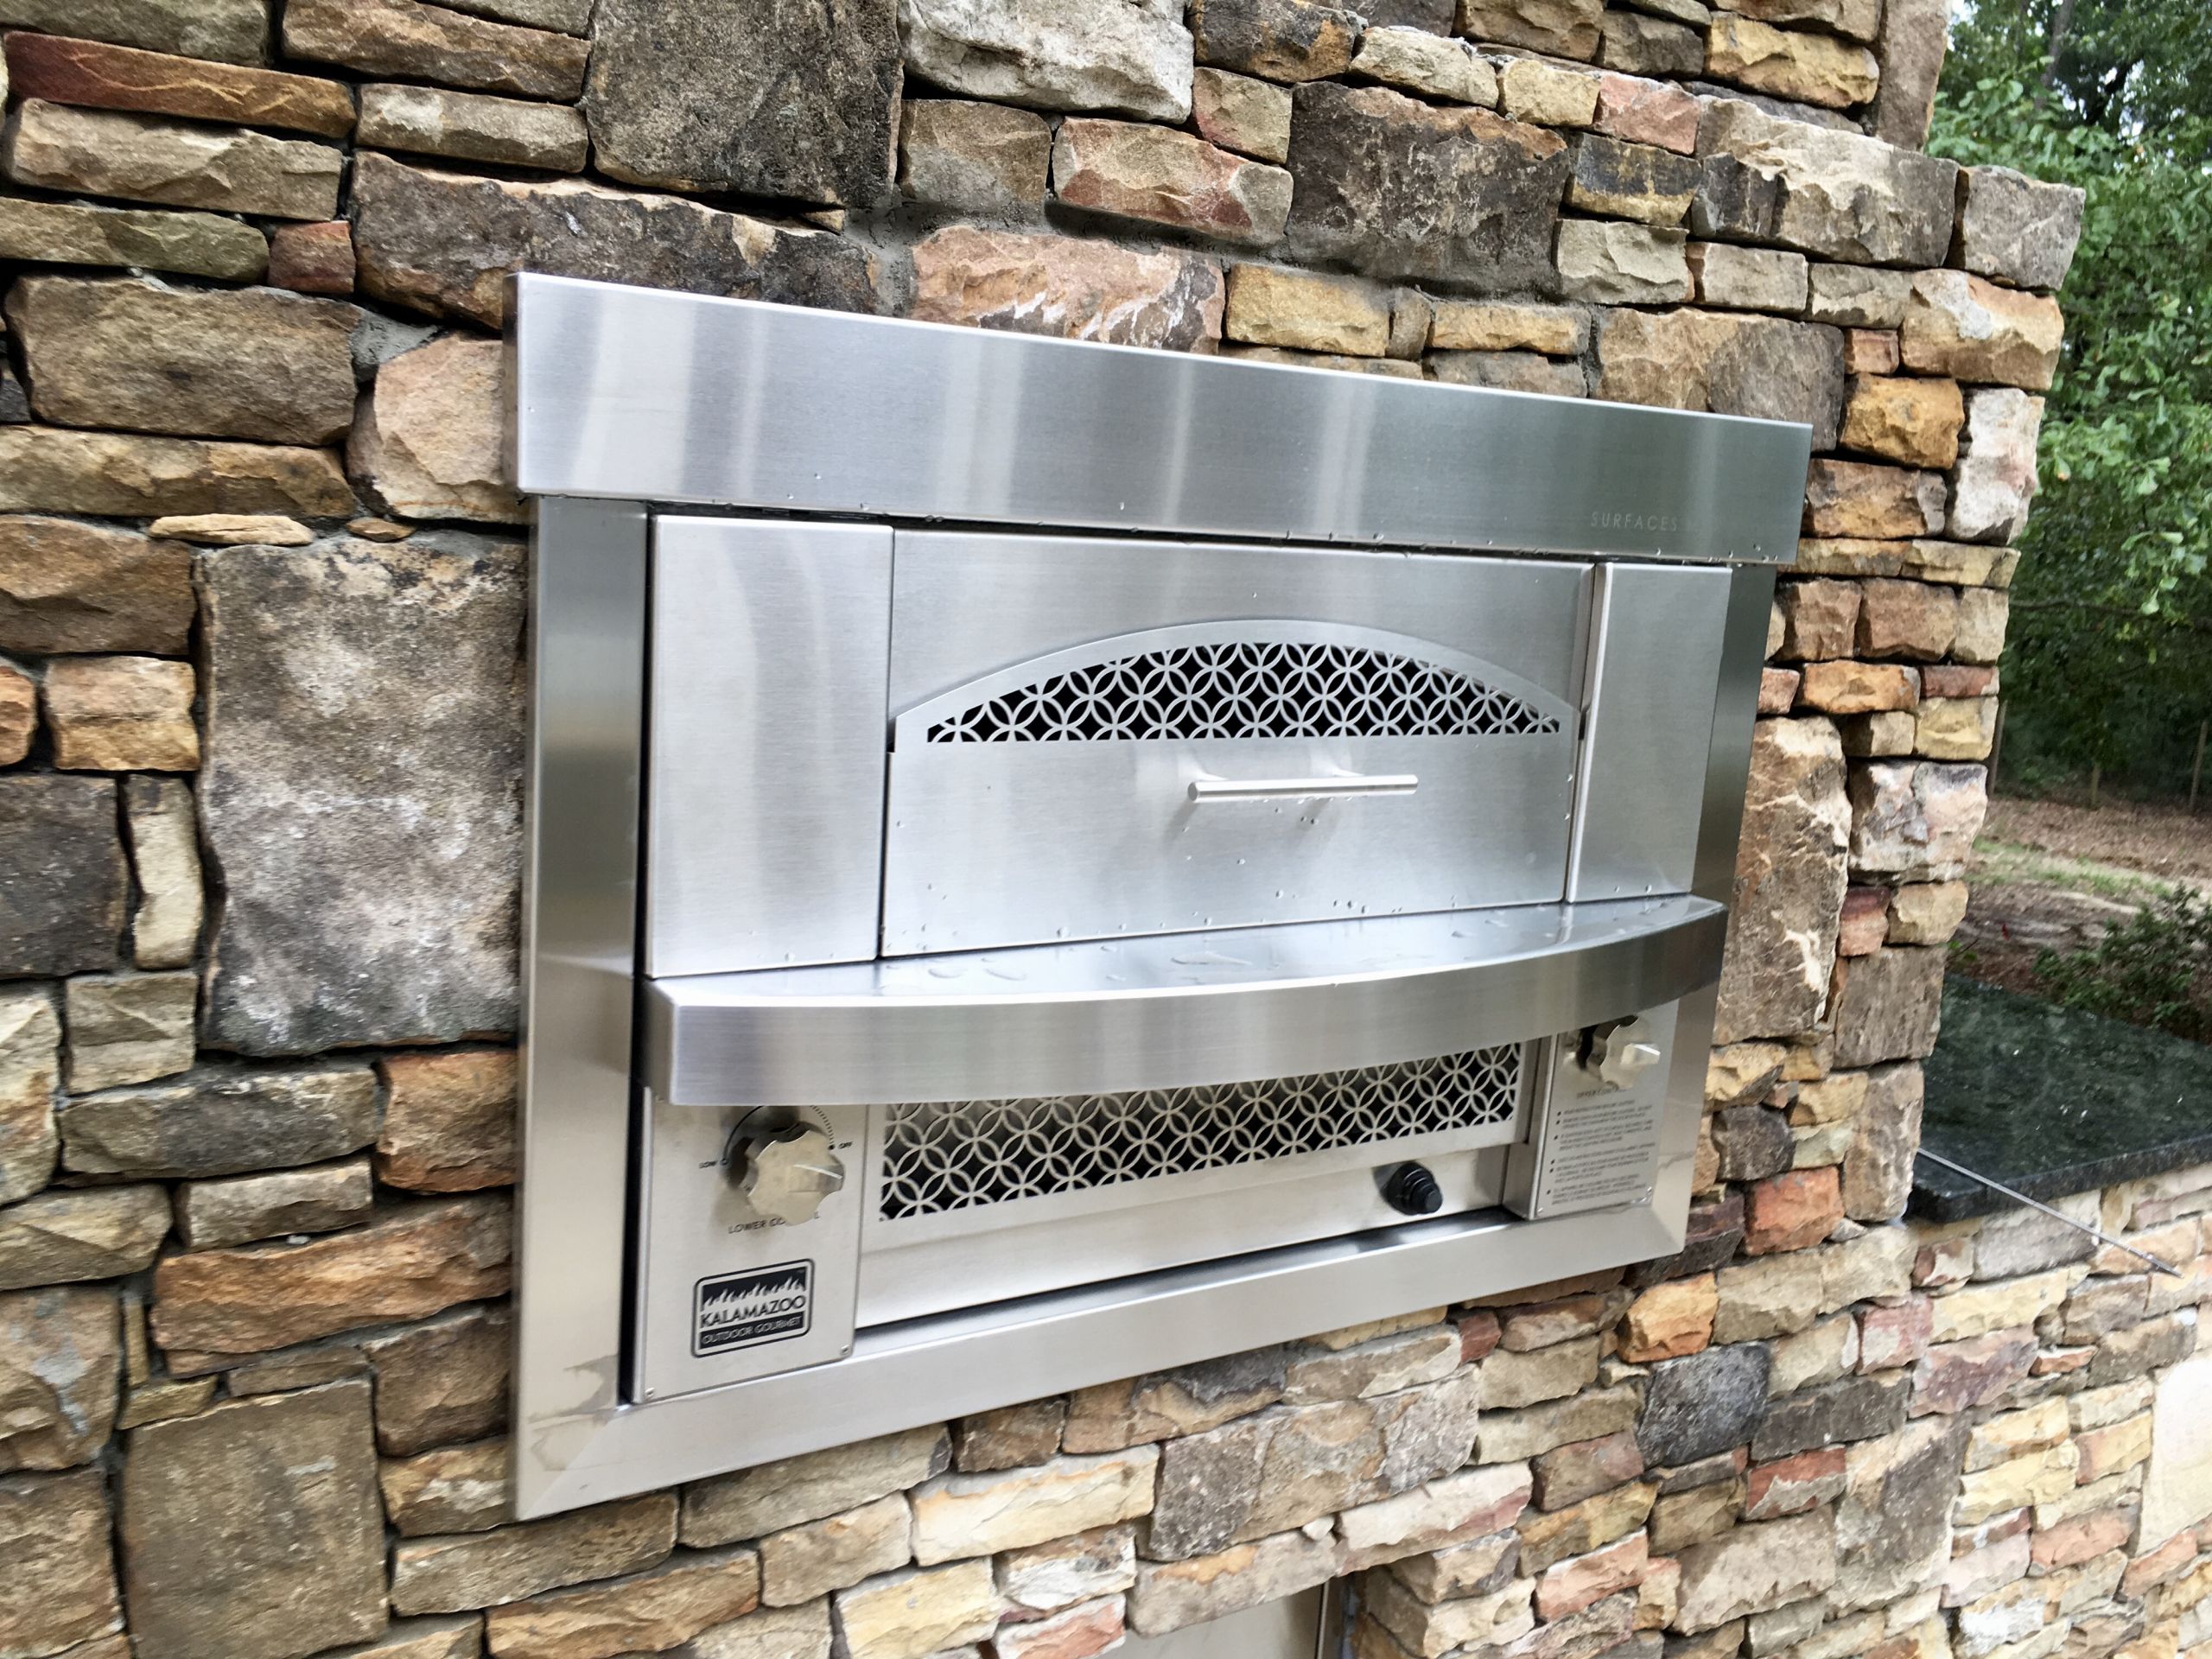 Outdoor Kitchen Oven
 Outdoor Kitchen Built in Gas Pizza Oven Fireside